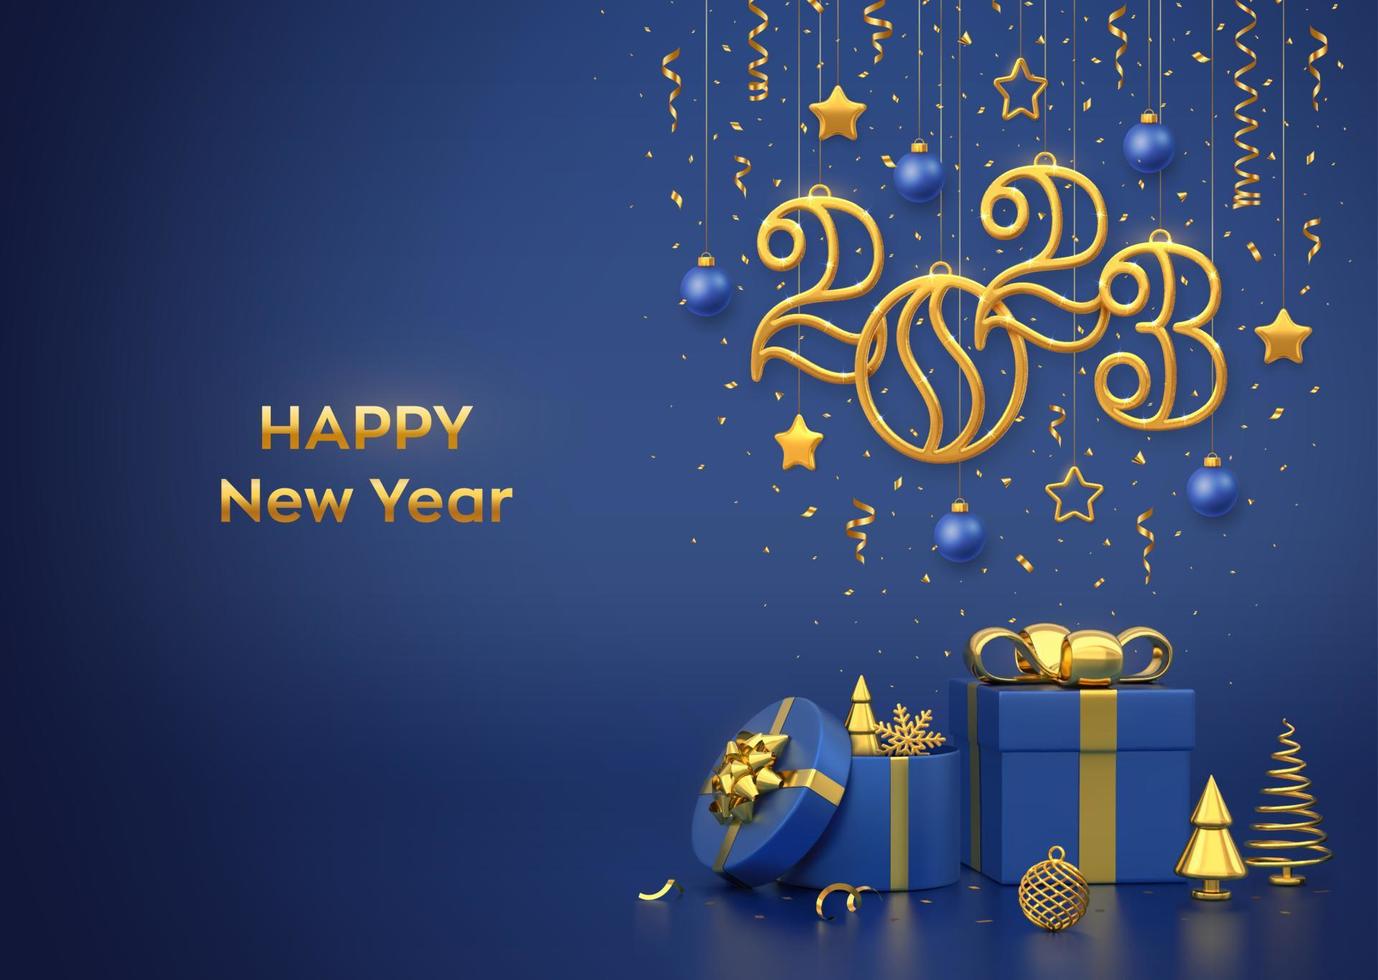 Happy New 2023 Year. Hanging golden metallic numbers 2023 with stars, balls and confetti on blue background. Gift boxes and golden metallic pine or fir, cone shape spruce trees. Vector illustration.